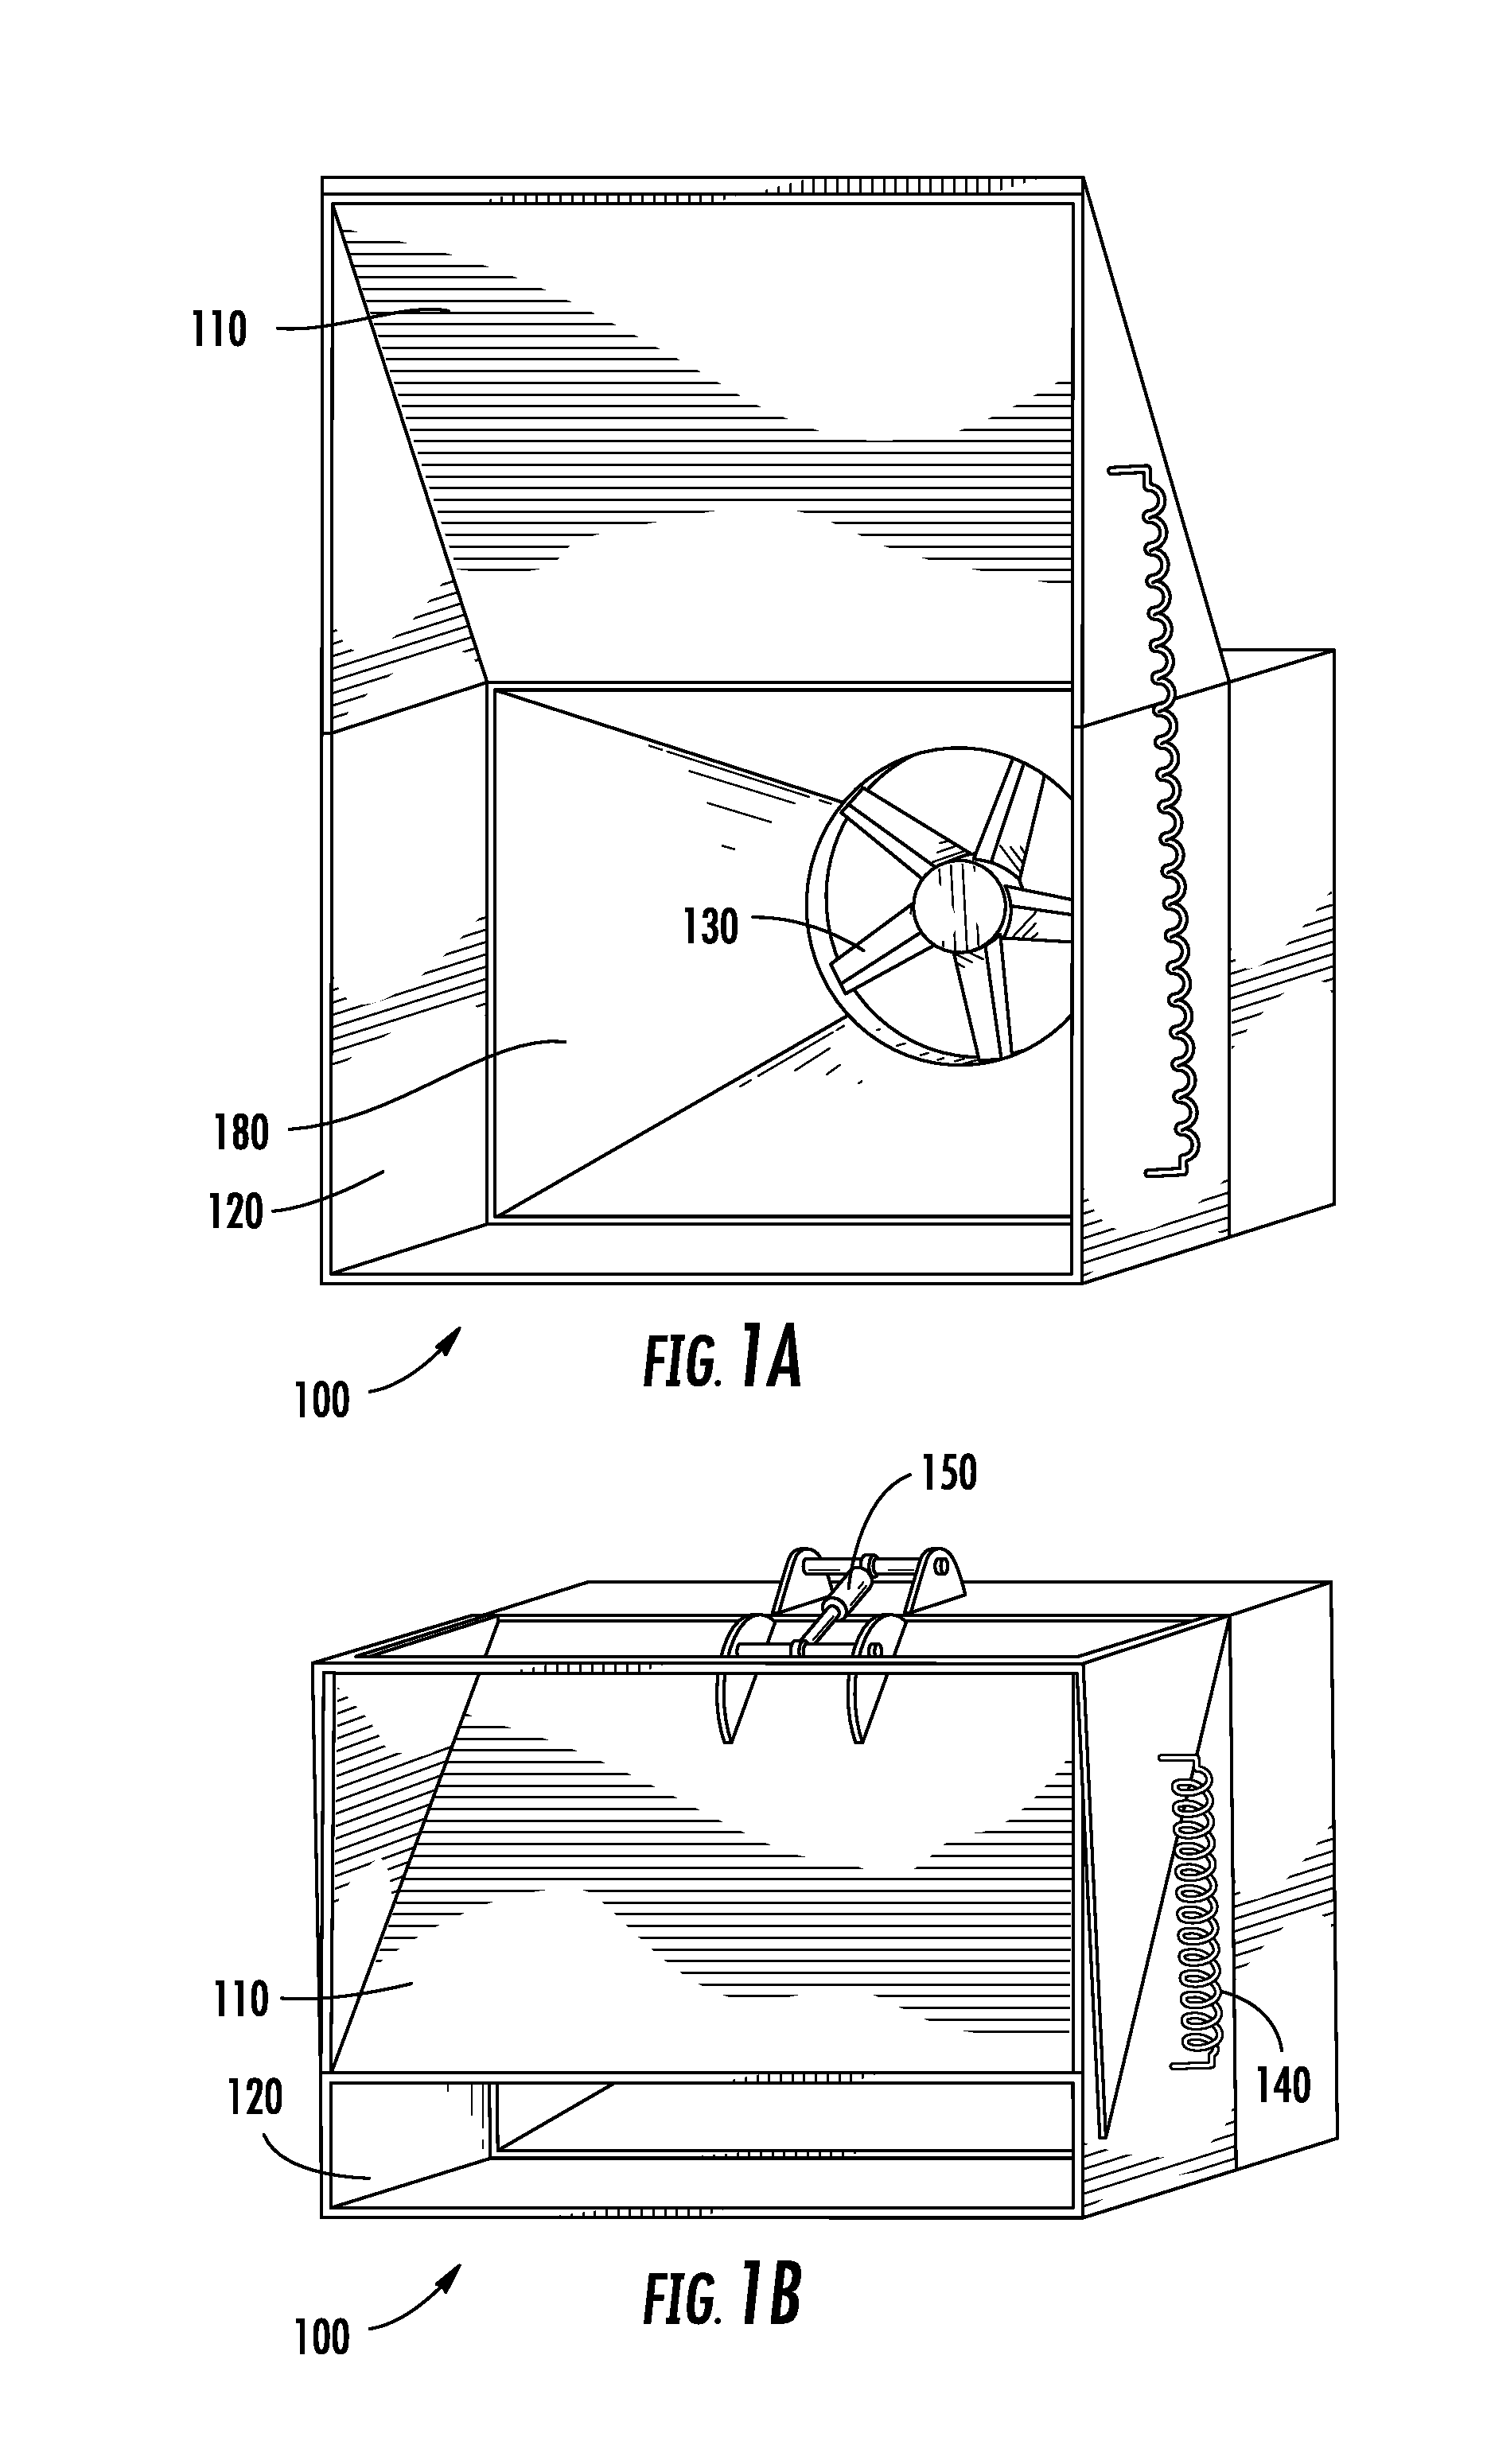 Methods, Systems, and Devices for Energy Generation